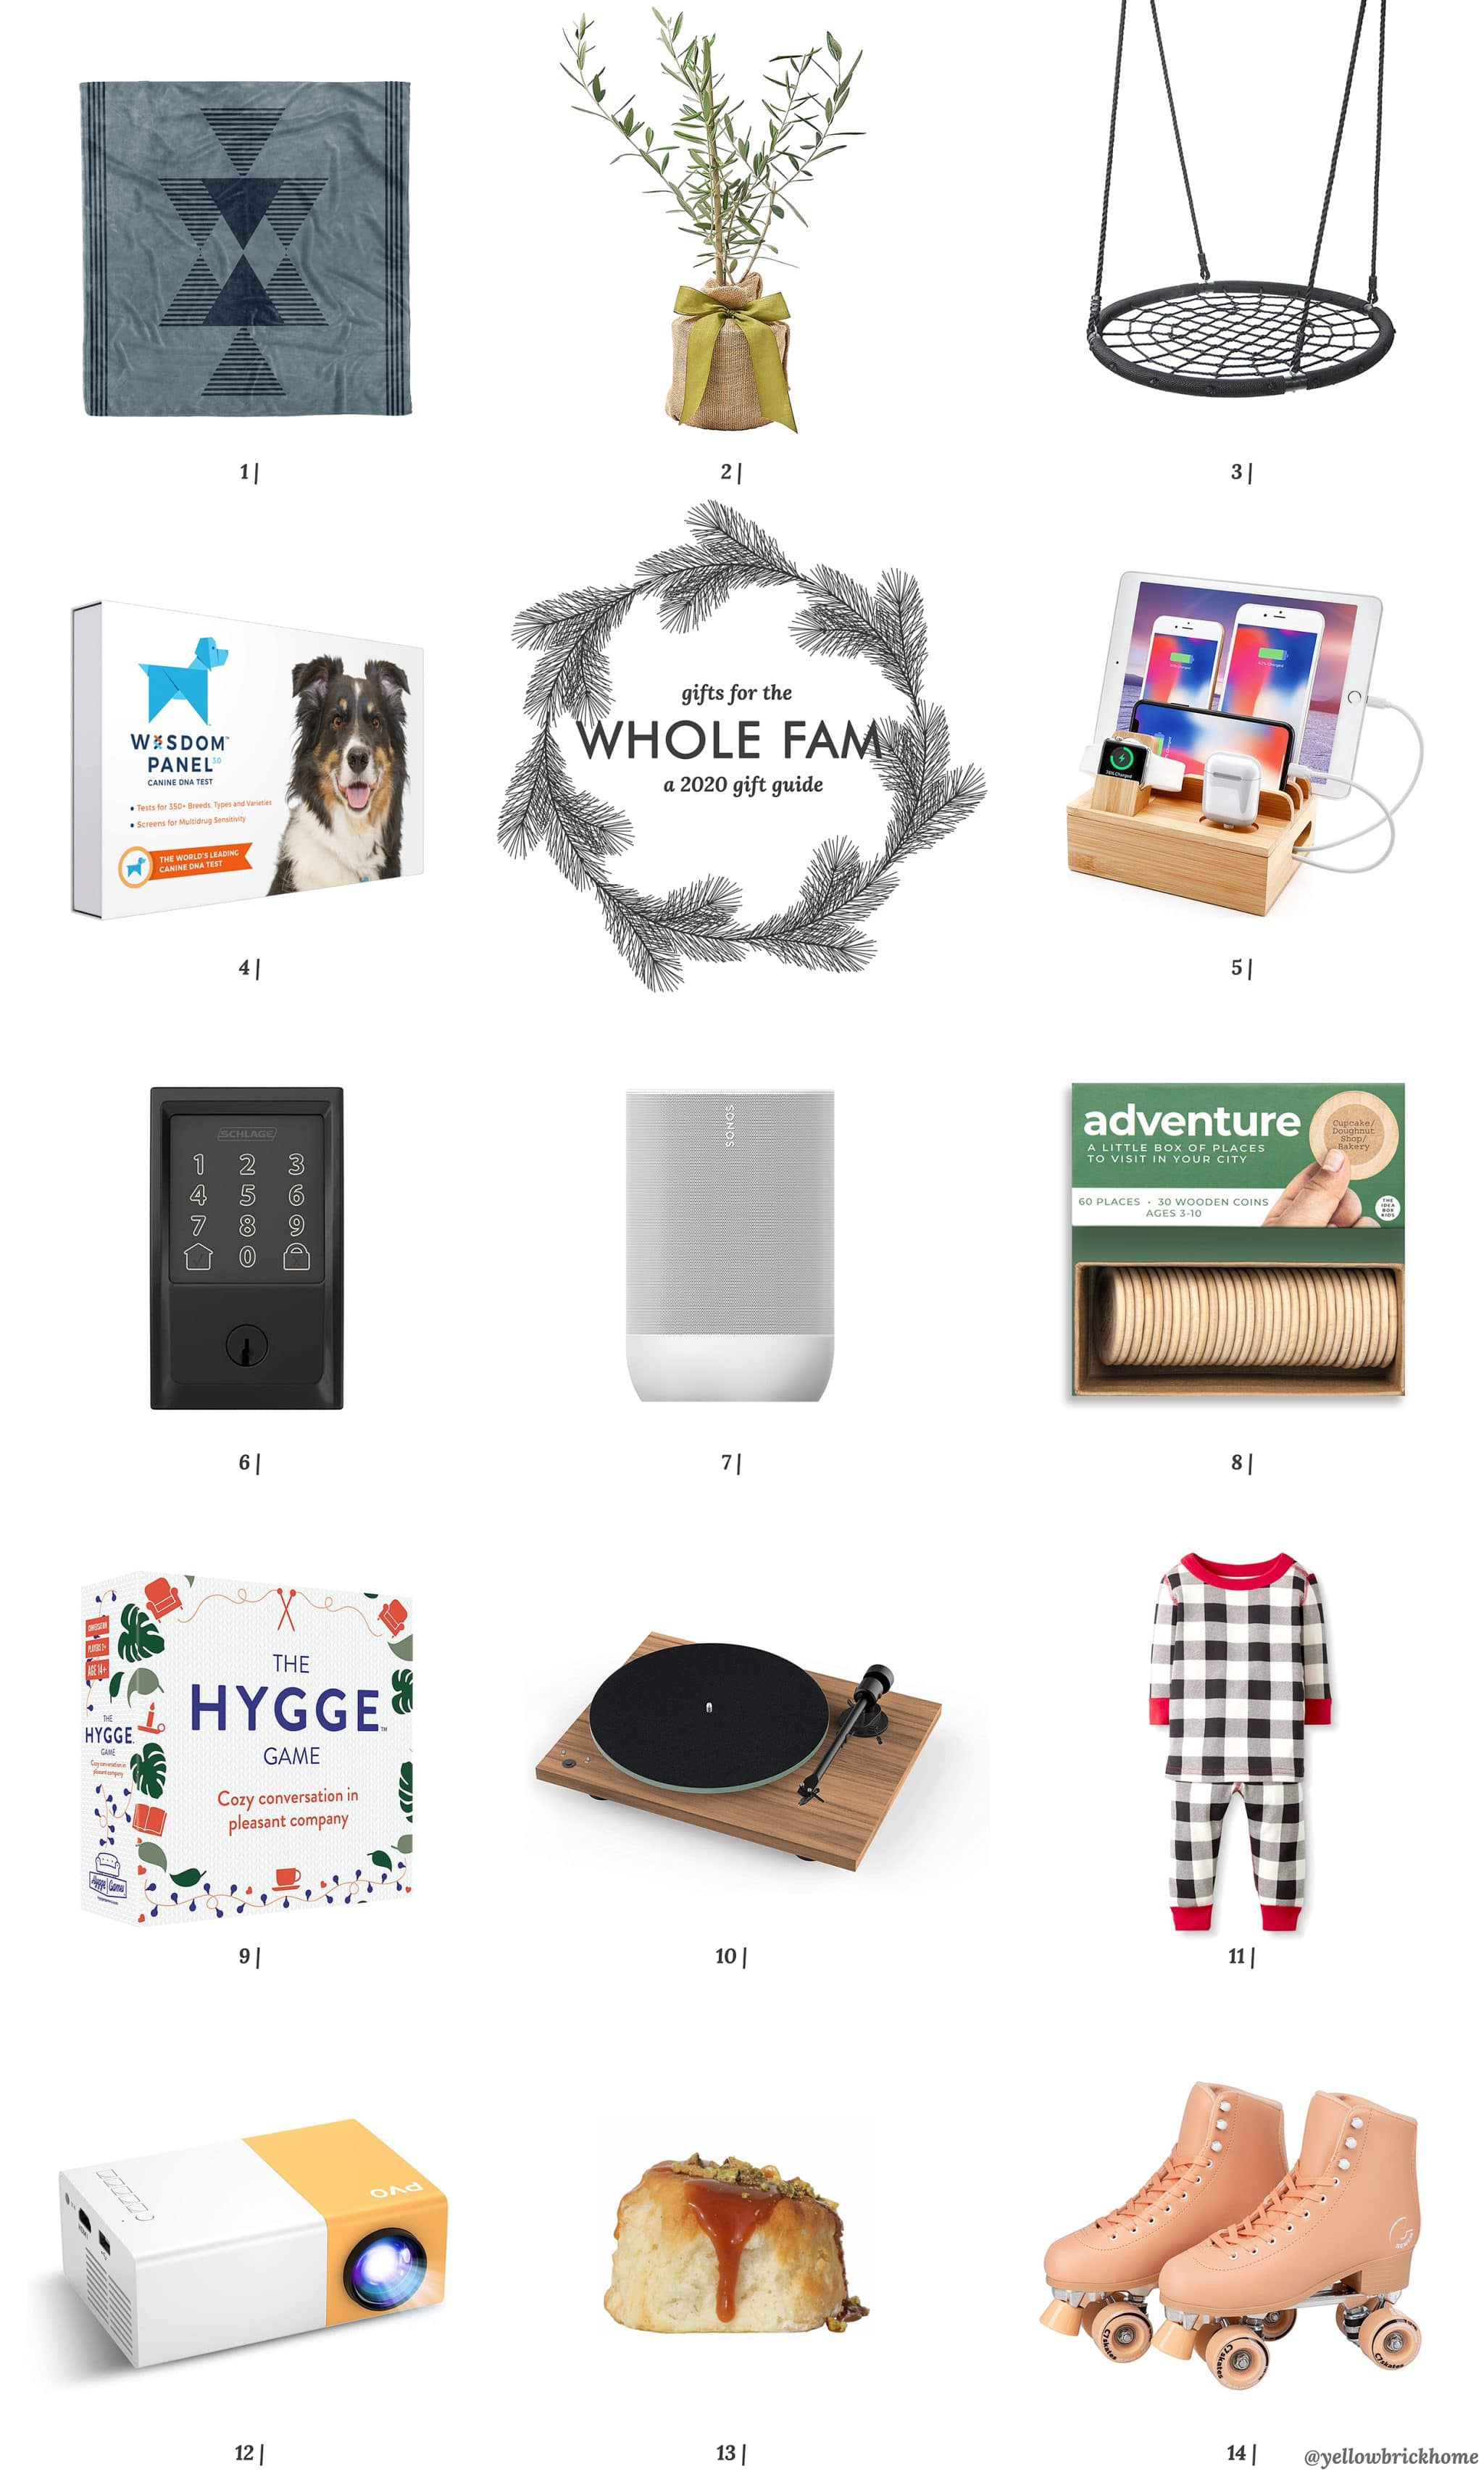 A round-up of gifts that the ENTIRE family can enjoy! Every gift is chosen with the whole family in mind. via Yellow Brick Home